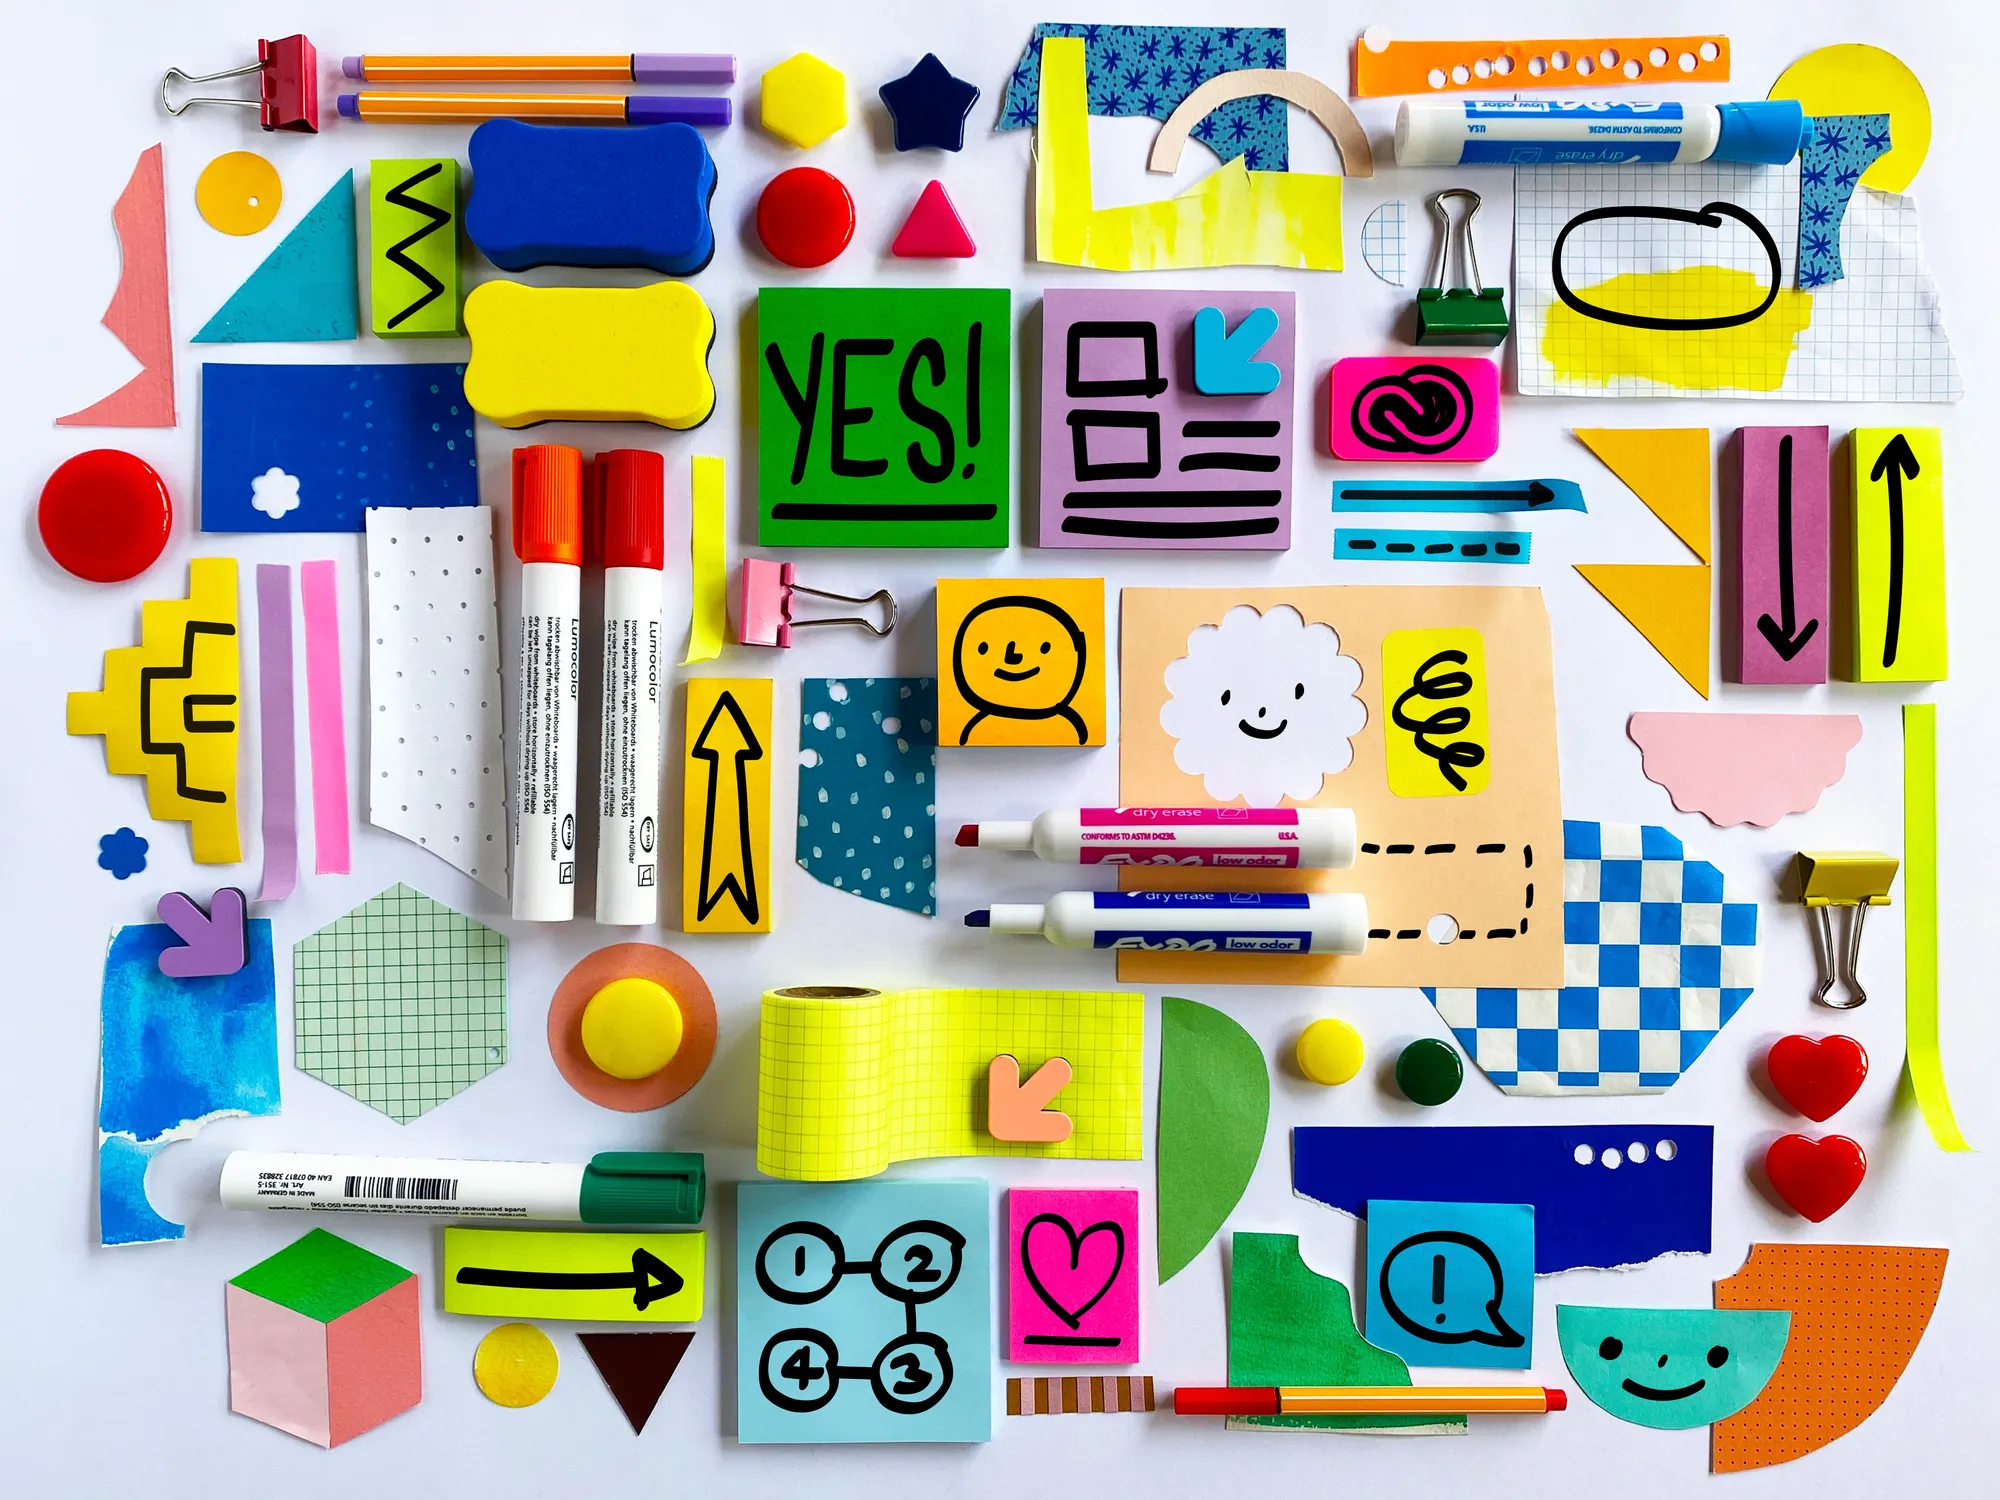 A colorful collection of writing tools and sticky notes, with drawn-on graphic art, arranged in an organized collage.